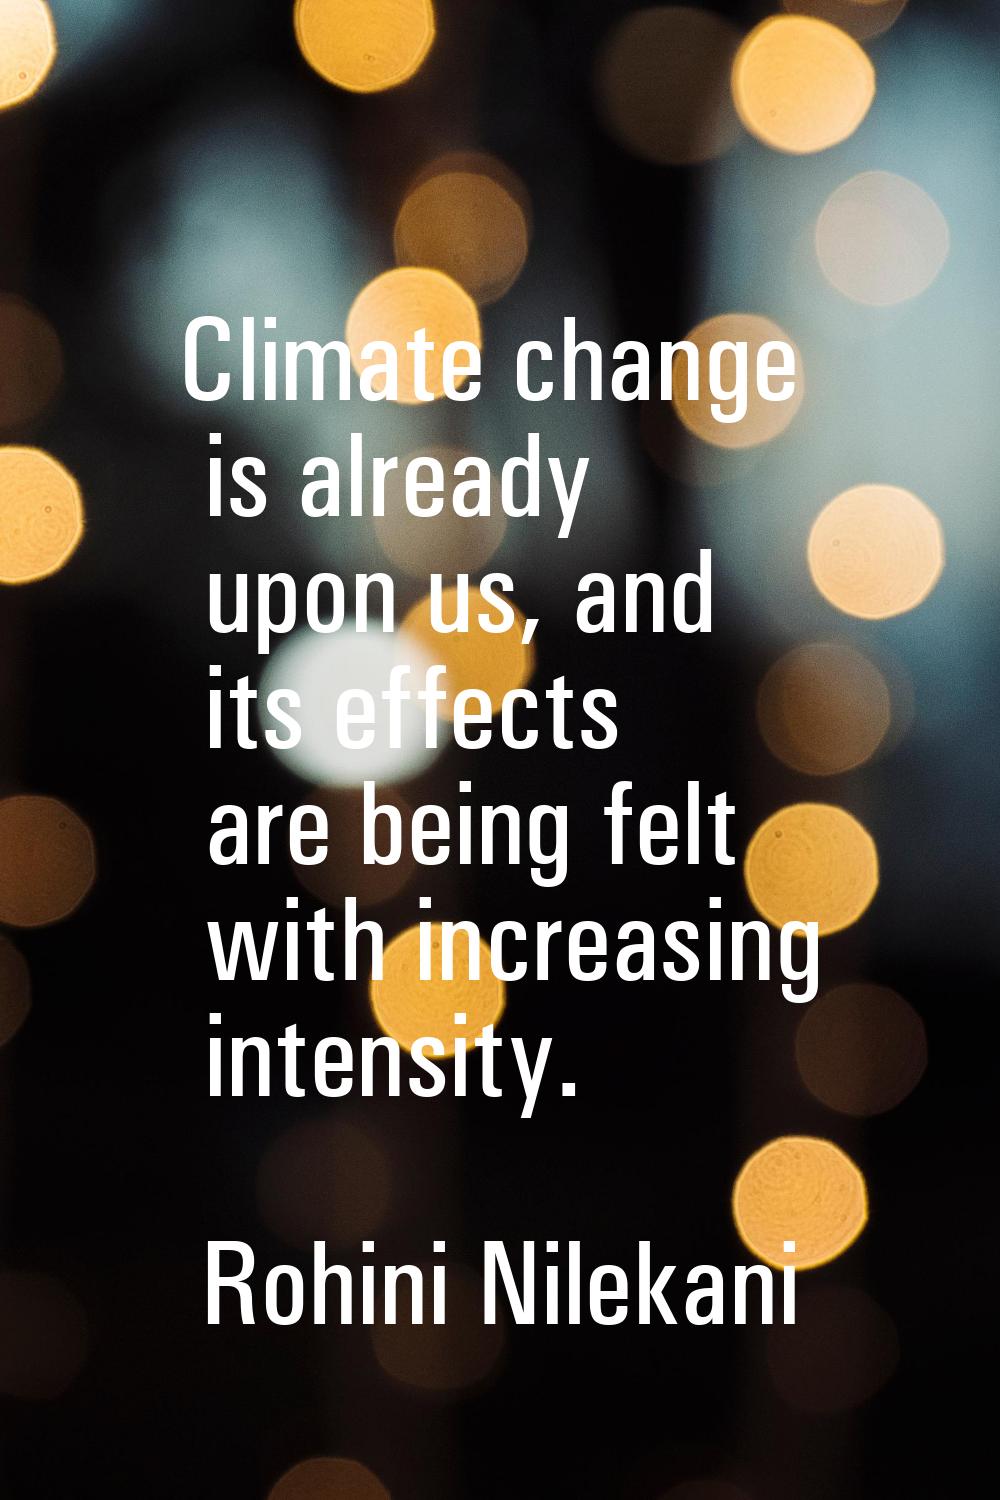 Climate change is already upon us, and its effects are being felt with increasing intensity.